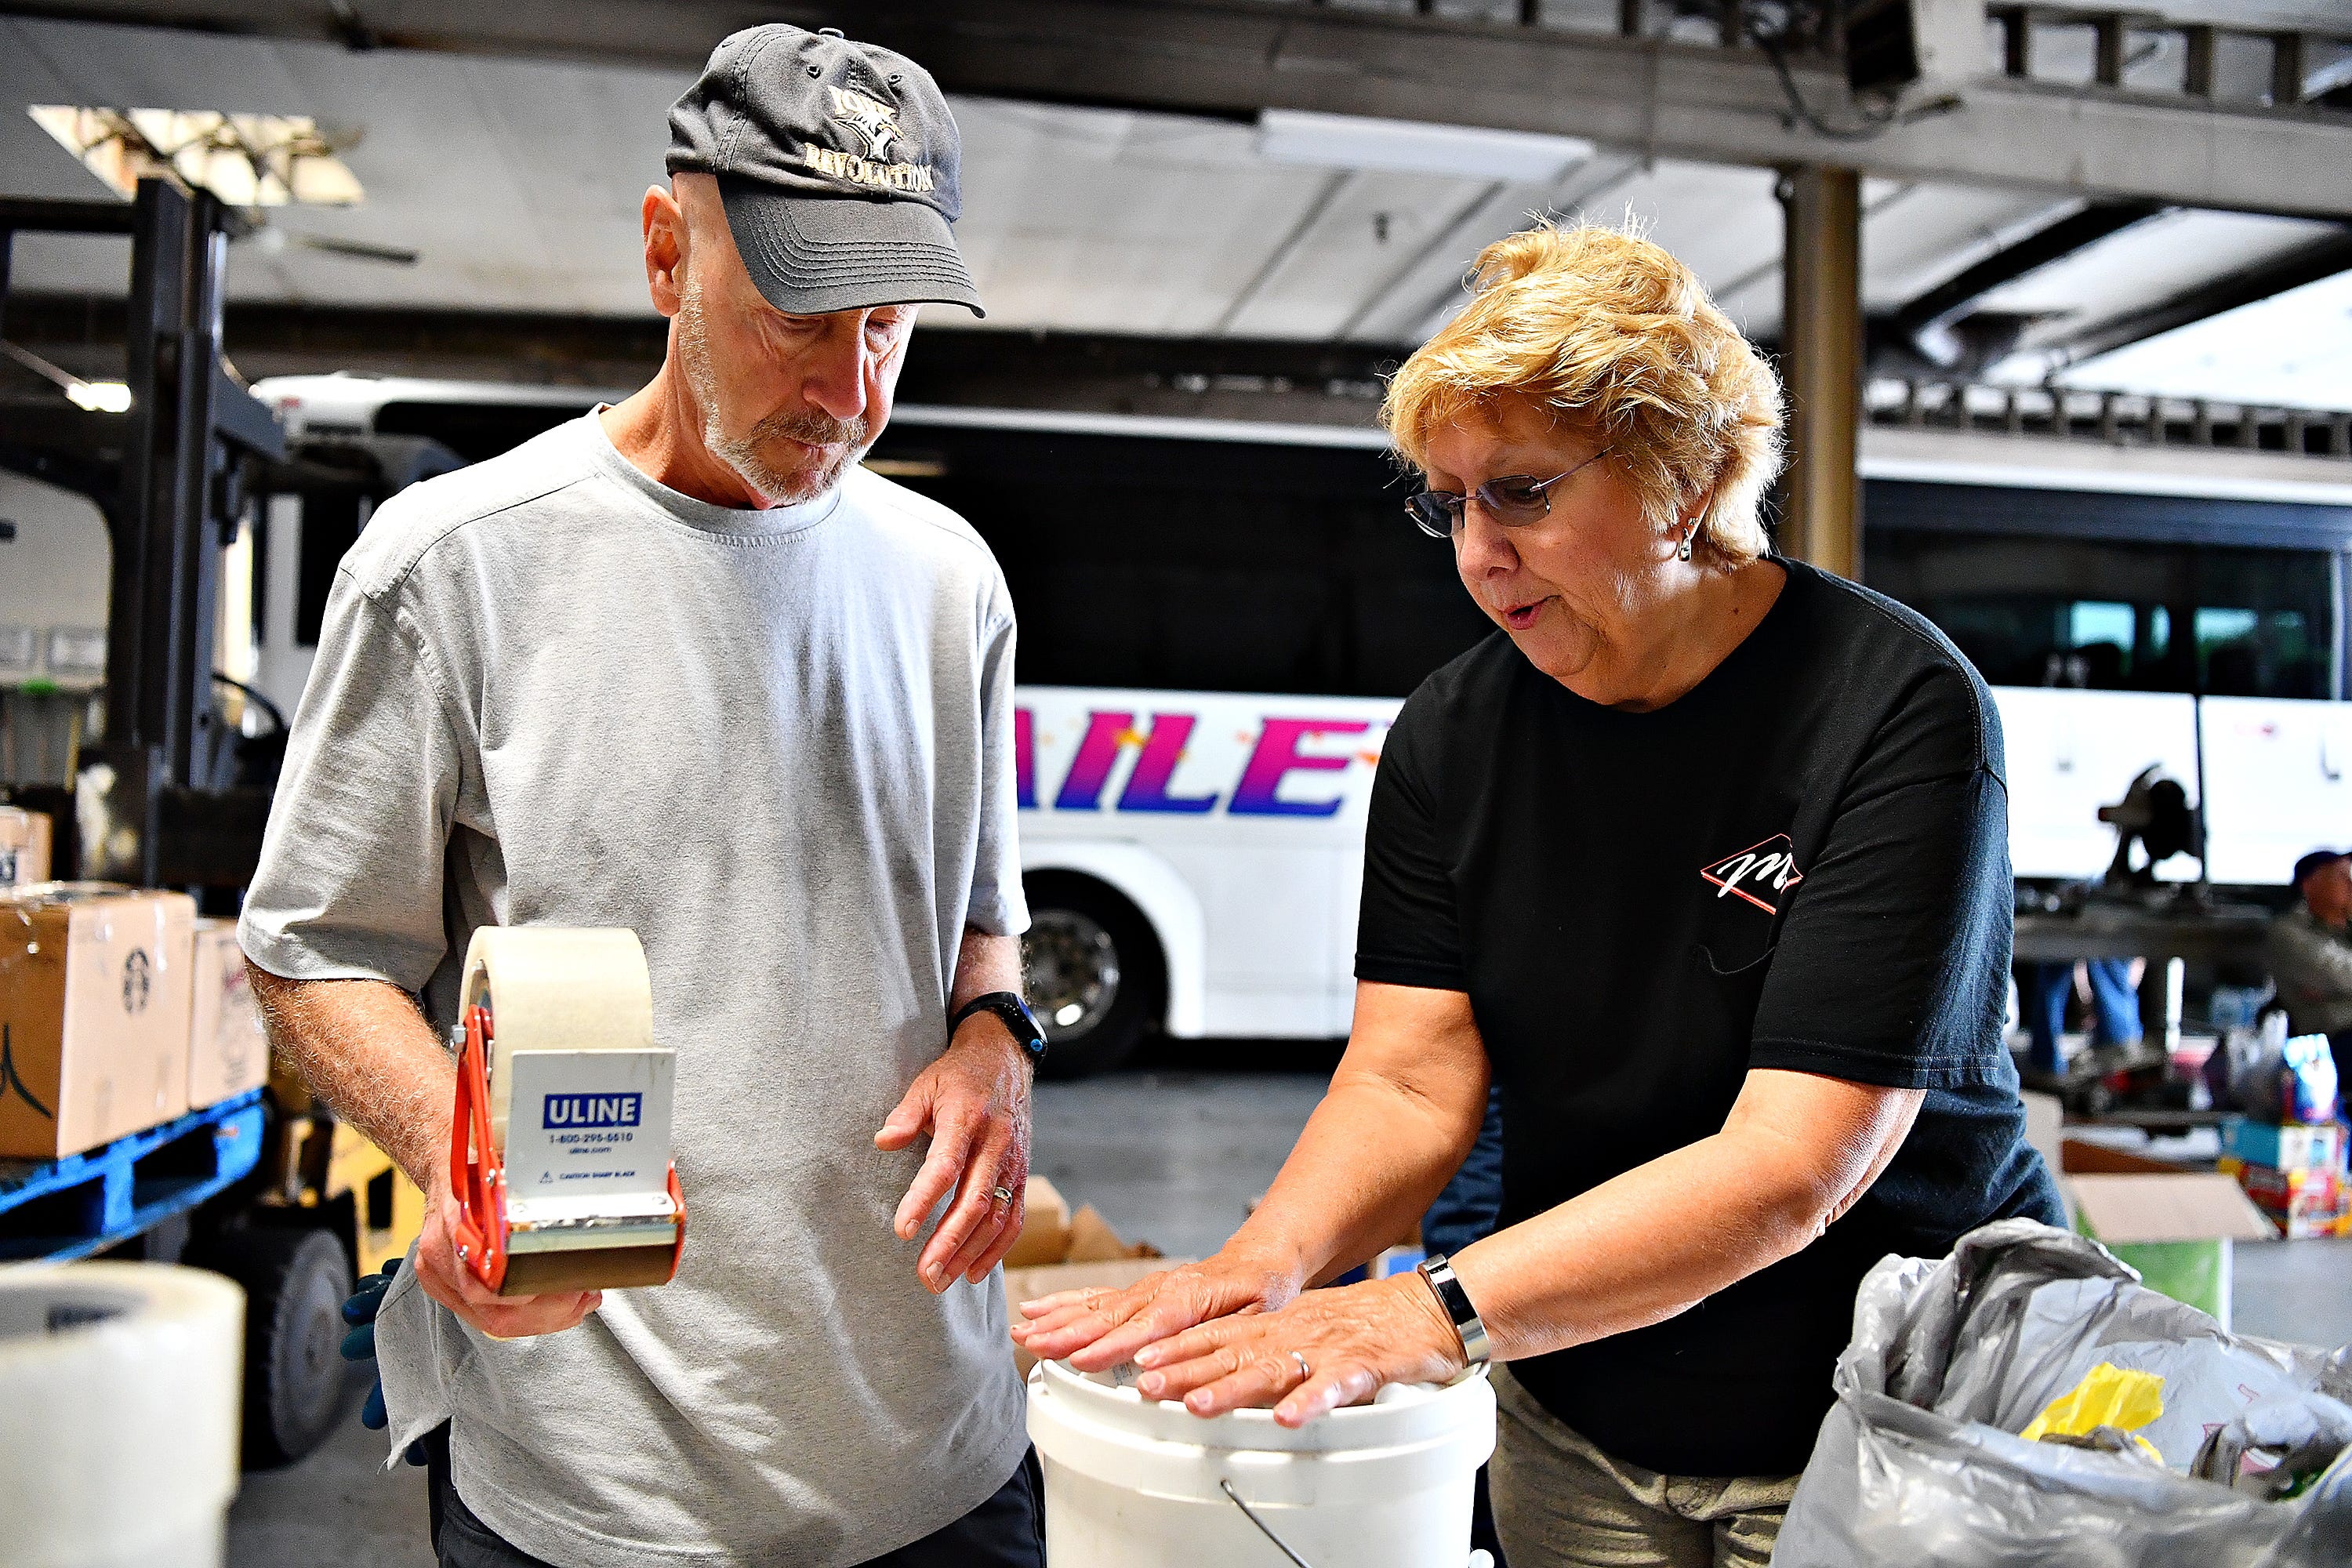 Don Reichard, left, of West Manchester Township, and Jane Bailey, of Spring Grove, discuss how they will secure items in a bucket as donations of non-perishable items and toiletries are collected at Bailey Coach in West Manchester Township, Tuesday, Sept. 11, 2018. The items will be delivered to areas that are projected to be in the path of Hurricane Florence. Dawn J. Sagert photo